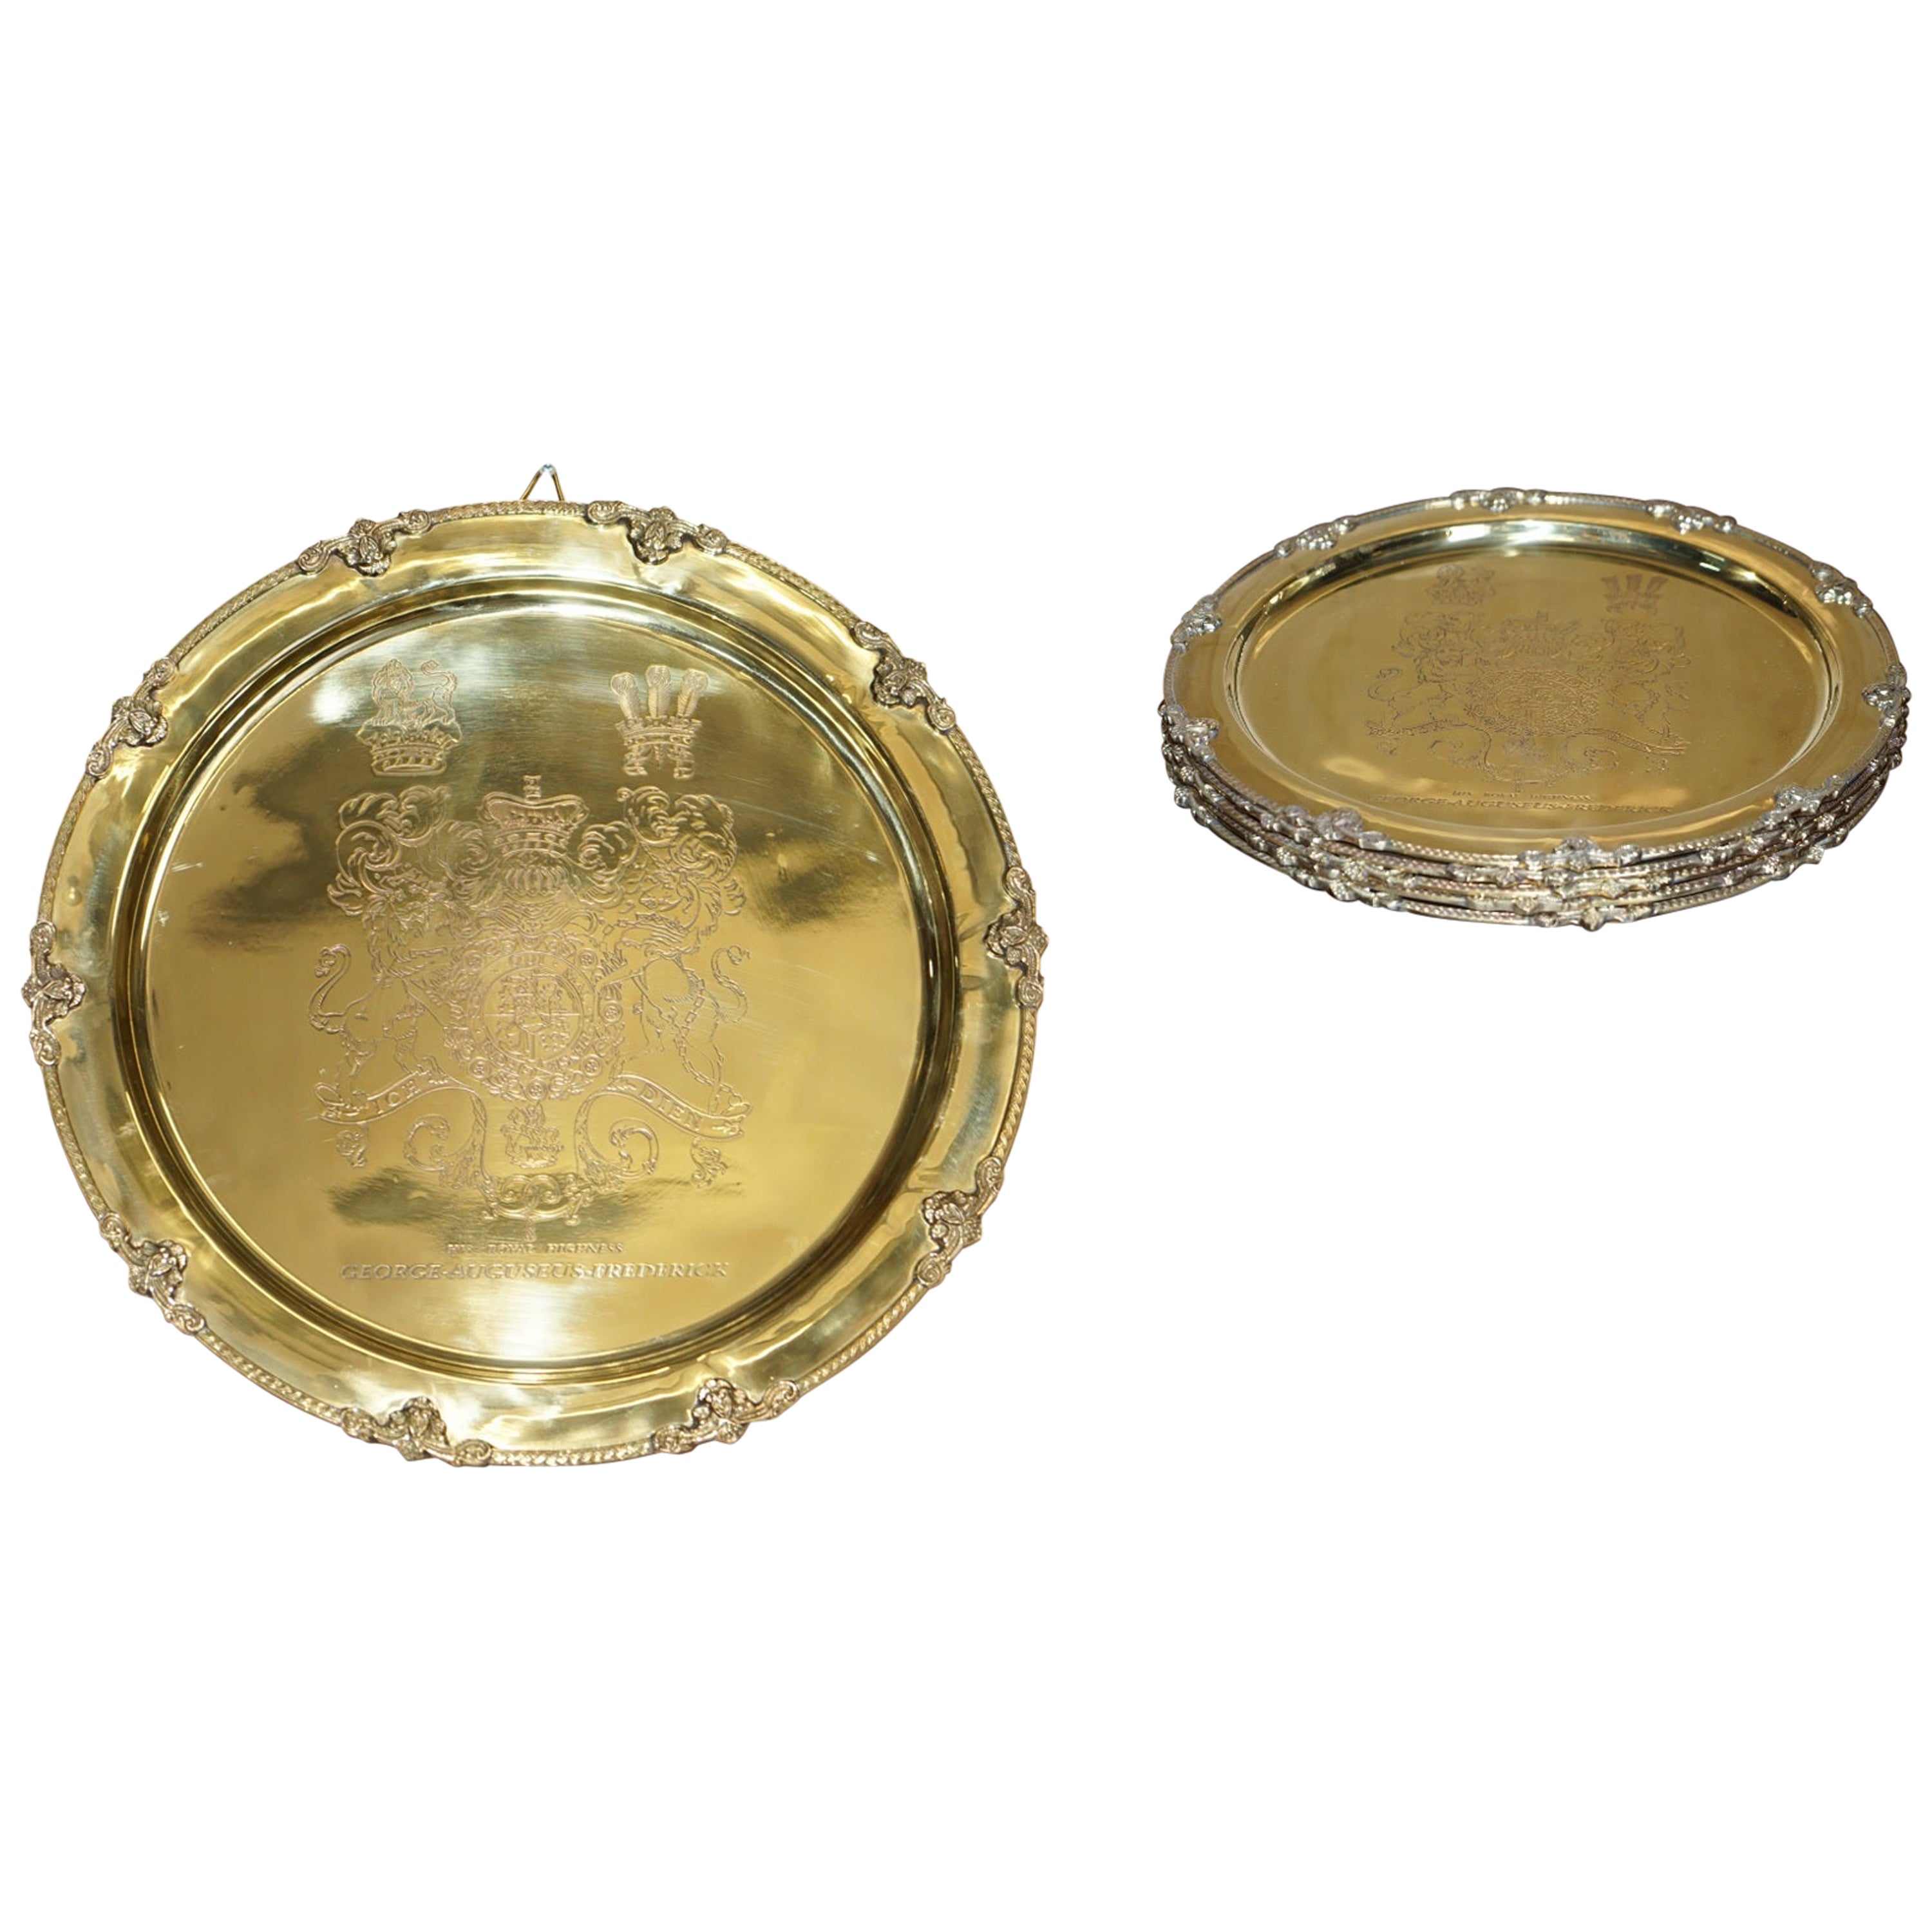 1 of 4 King George Auguseue Frederick Arms Gilt Sterling Silver Plated Trays For Sale